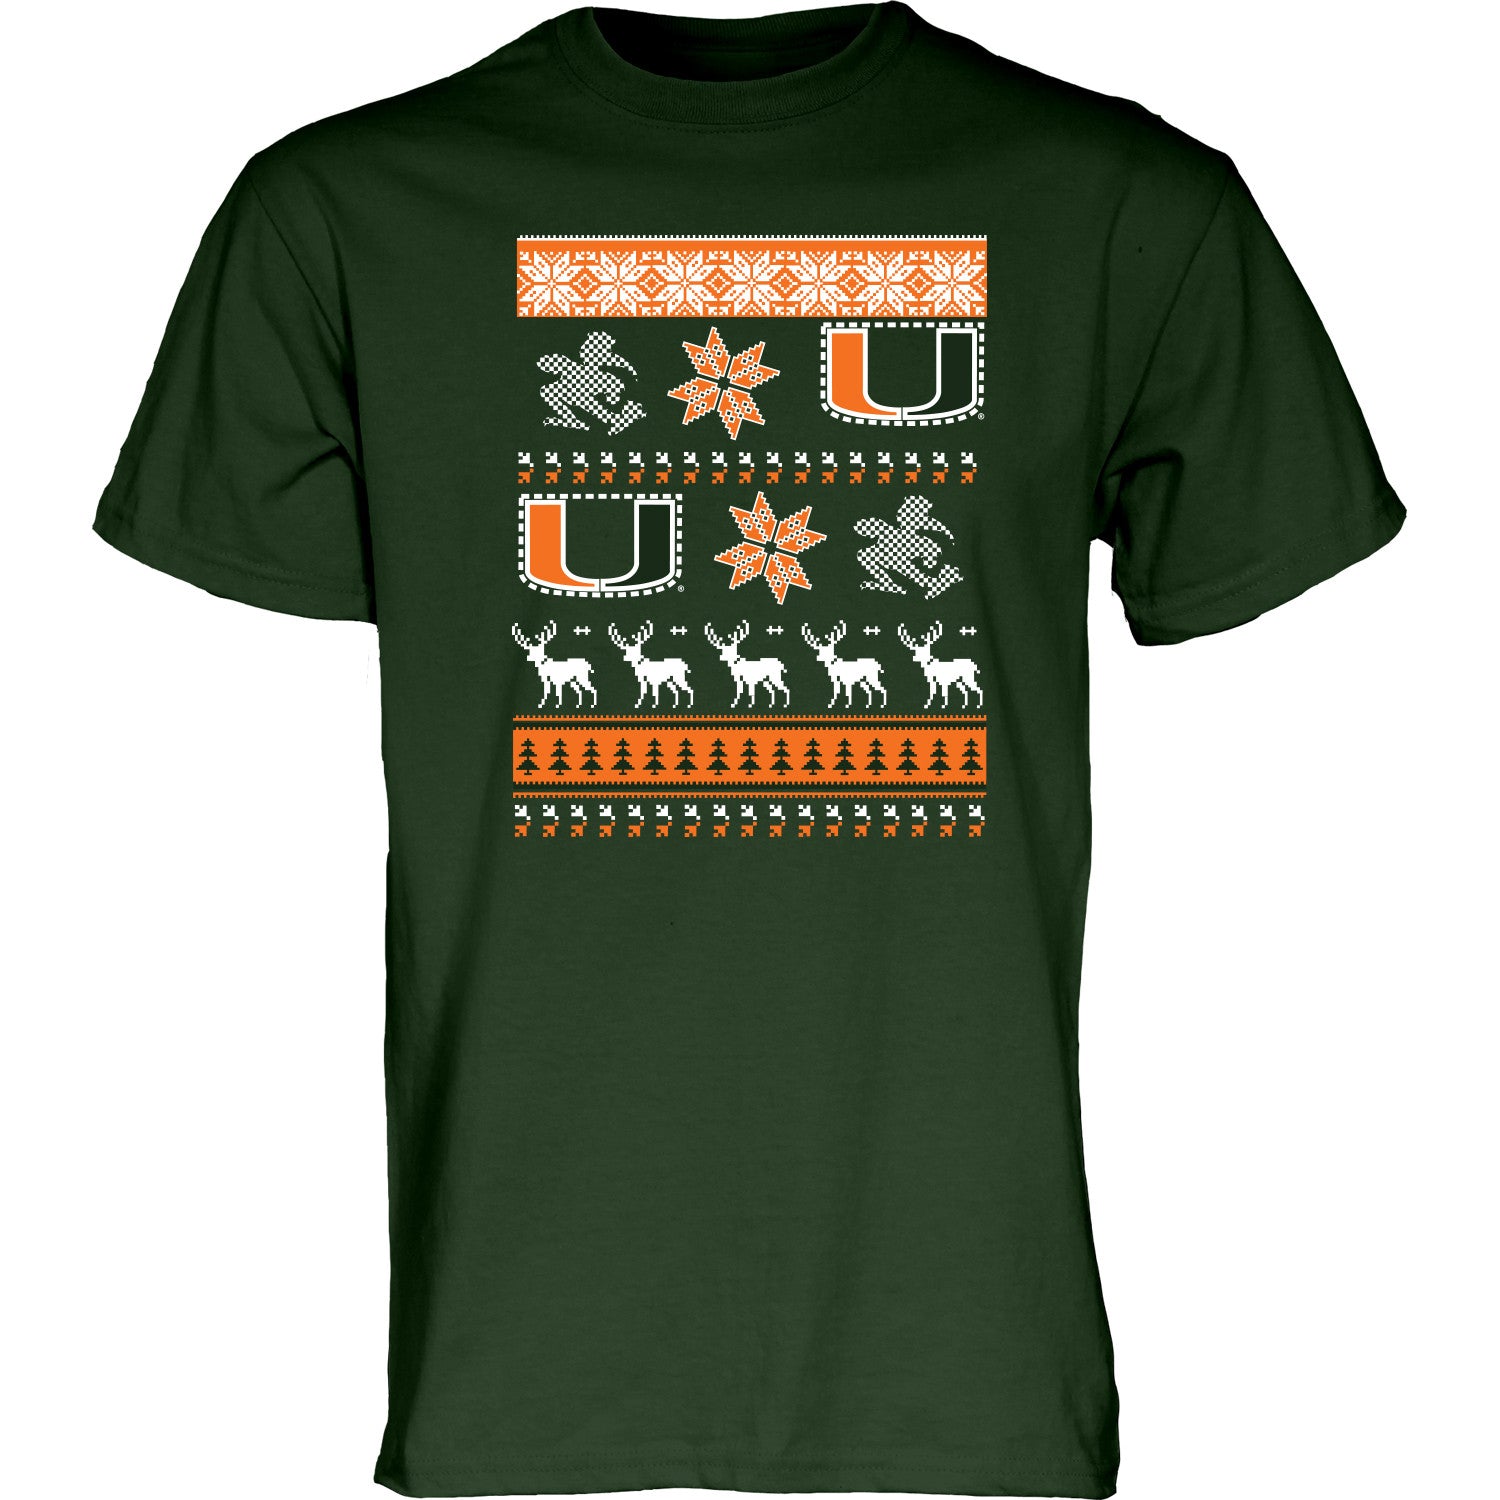 Miami Hurricanes Ugly Sweater T-Shirt